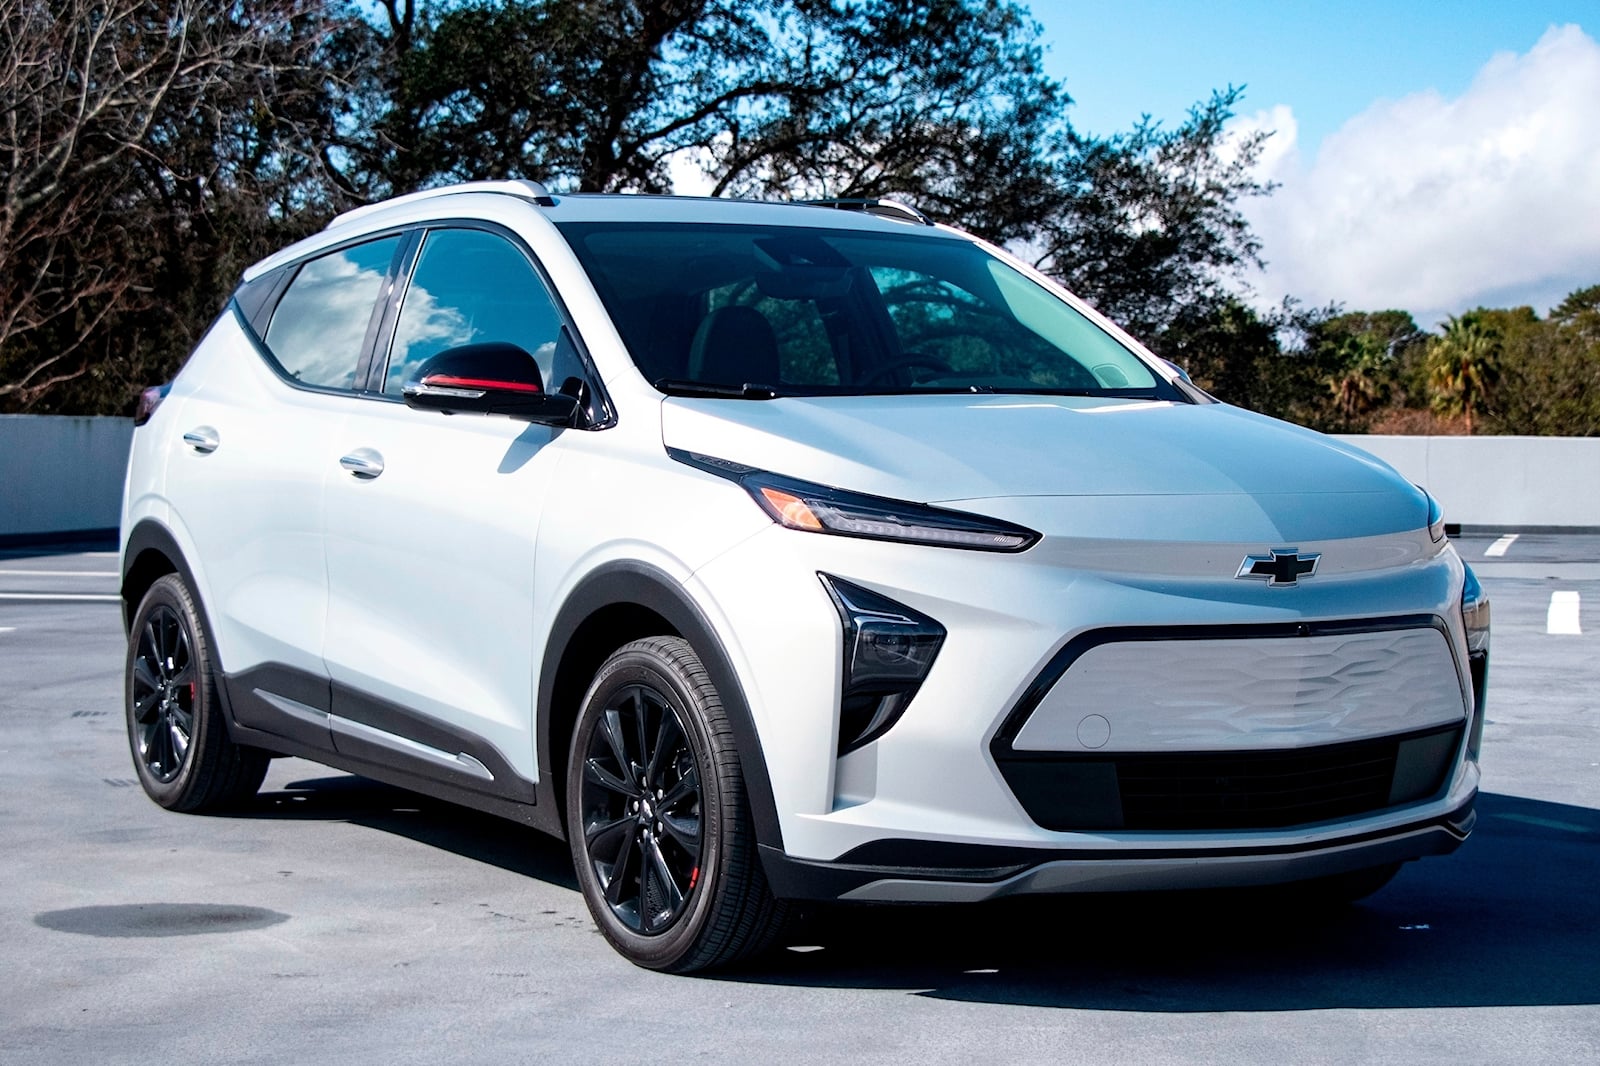 Toyota Owners Have Higher TradeIn Rates For EVs Compared To Rivals